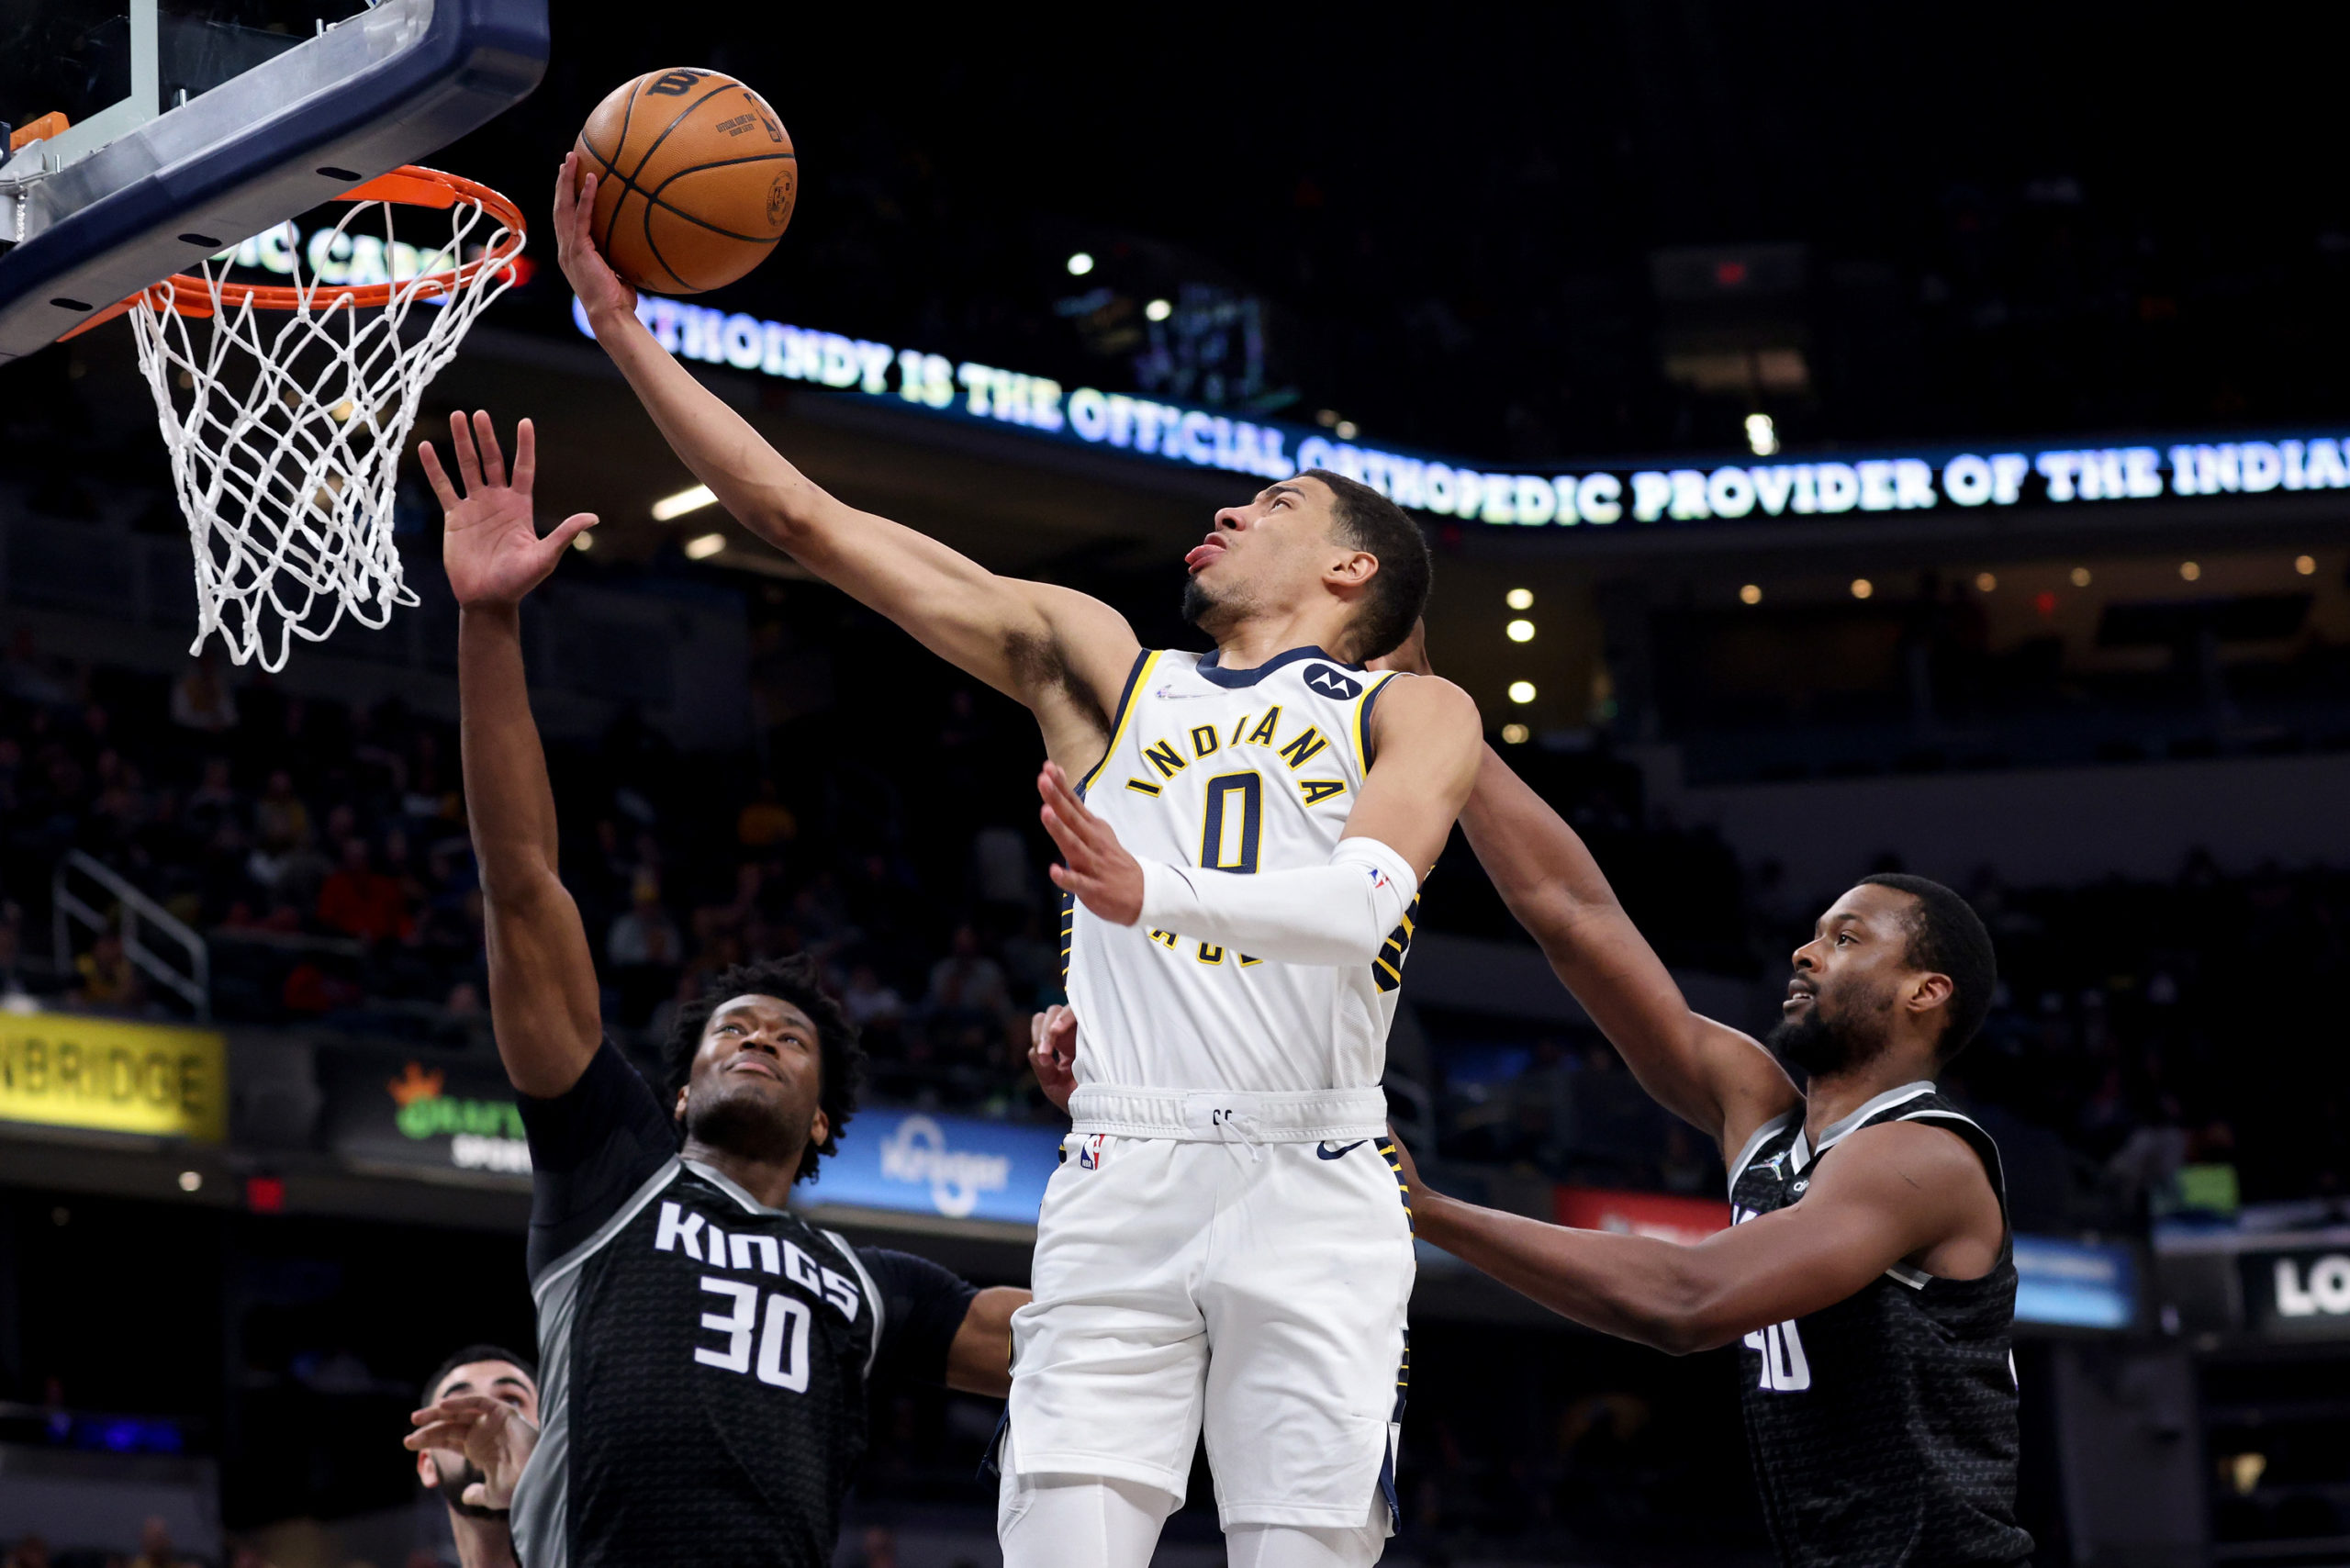 Tyrese Haliburton becomes youngest player in Pacers franchise